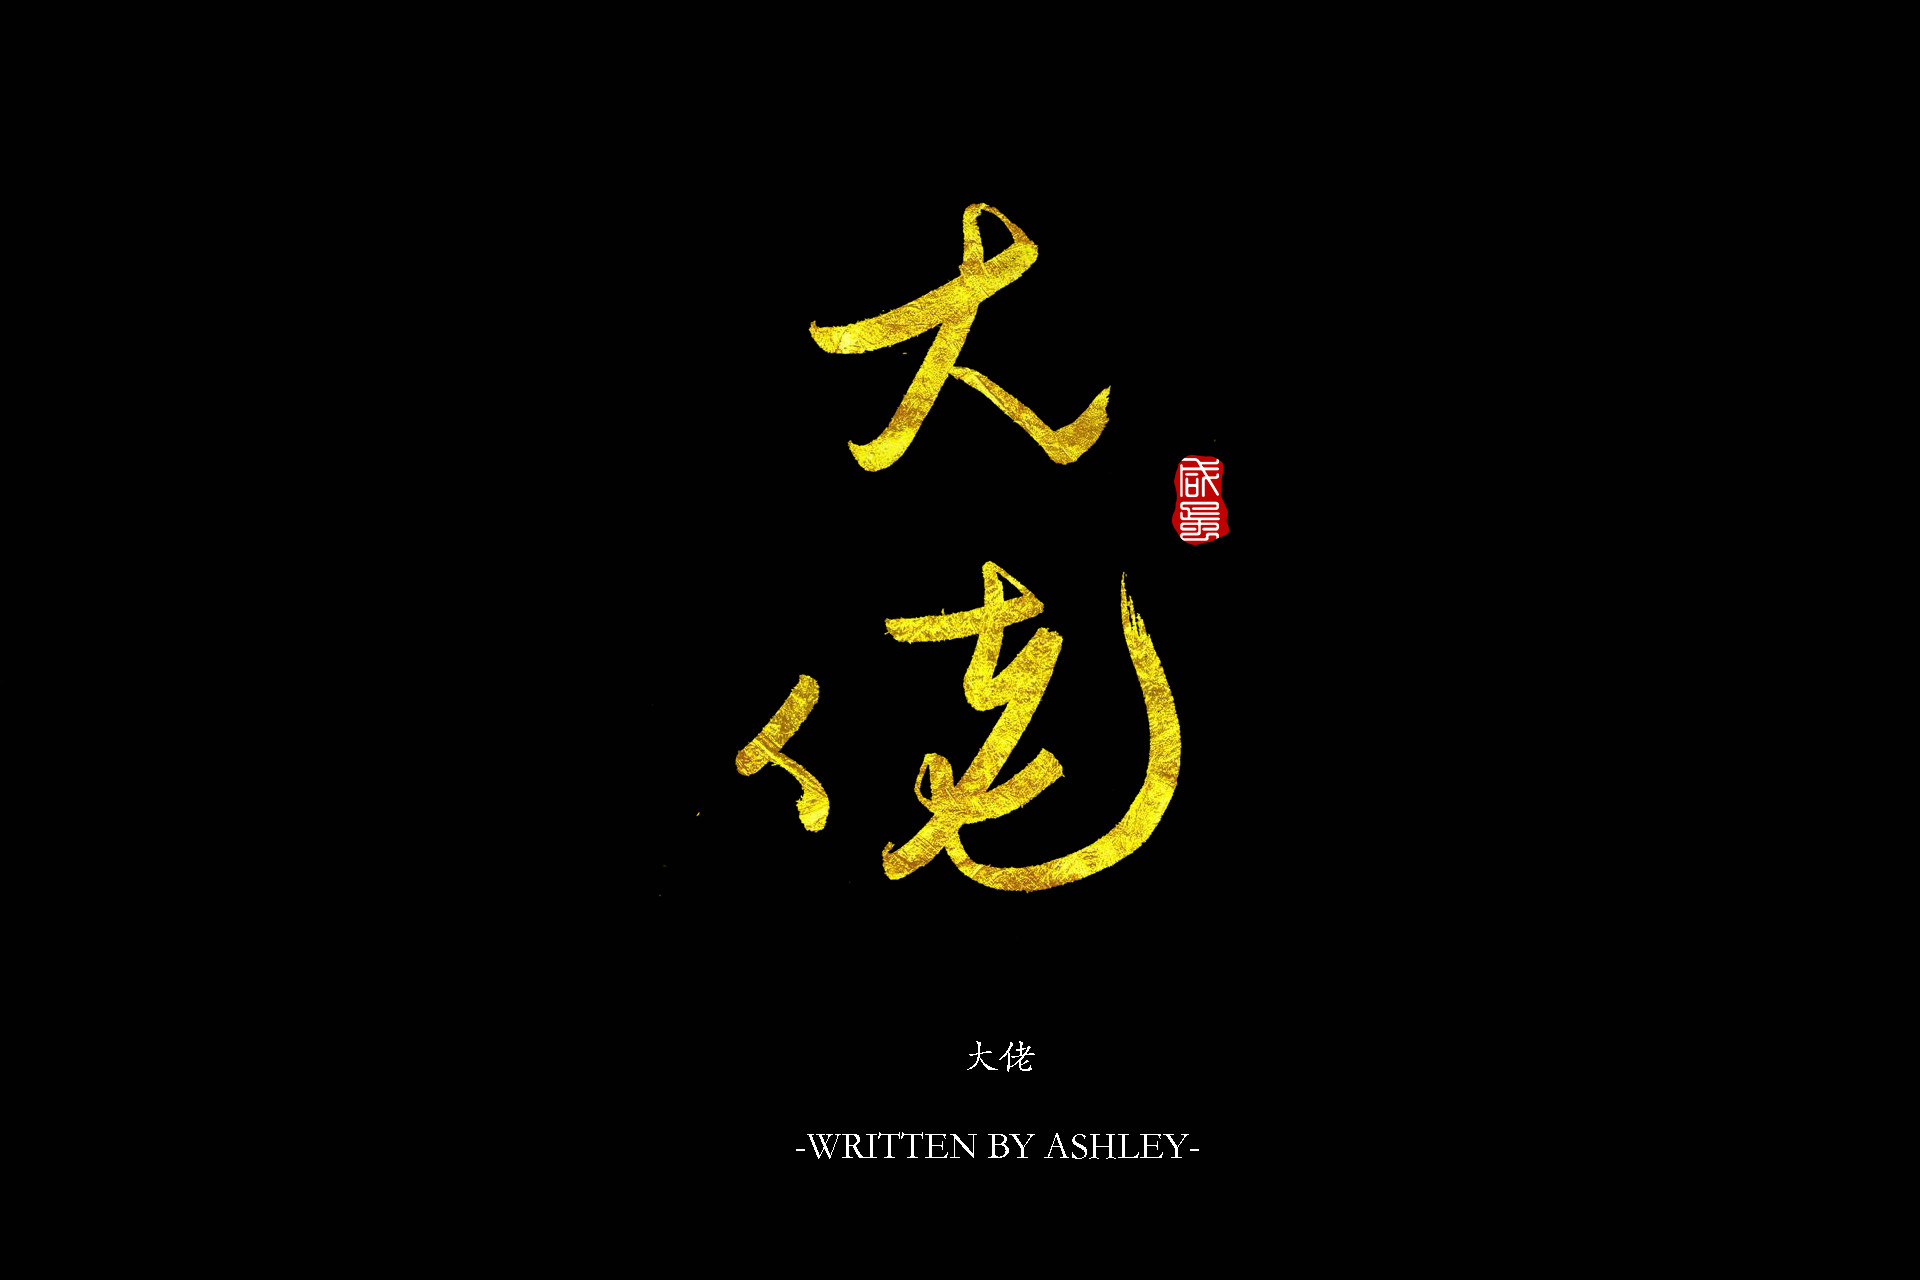 4P Smart handwriting Chinese font calligraphy style